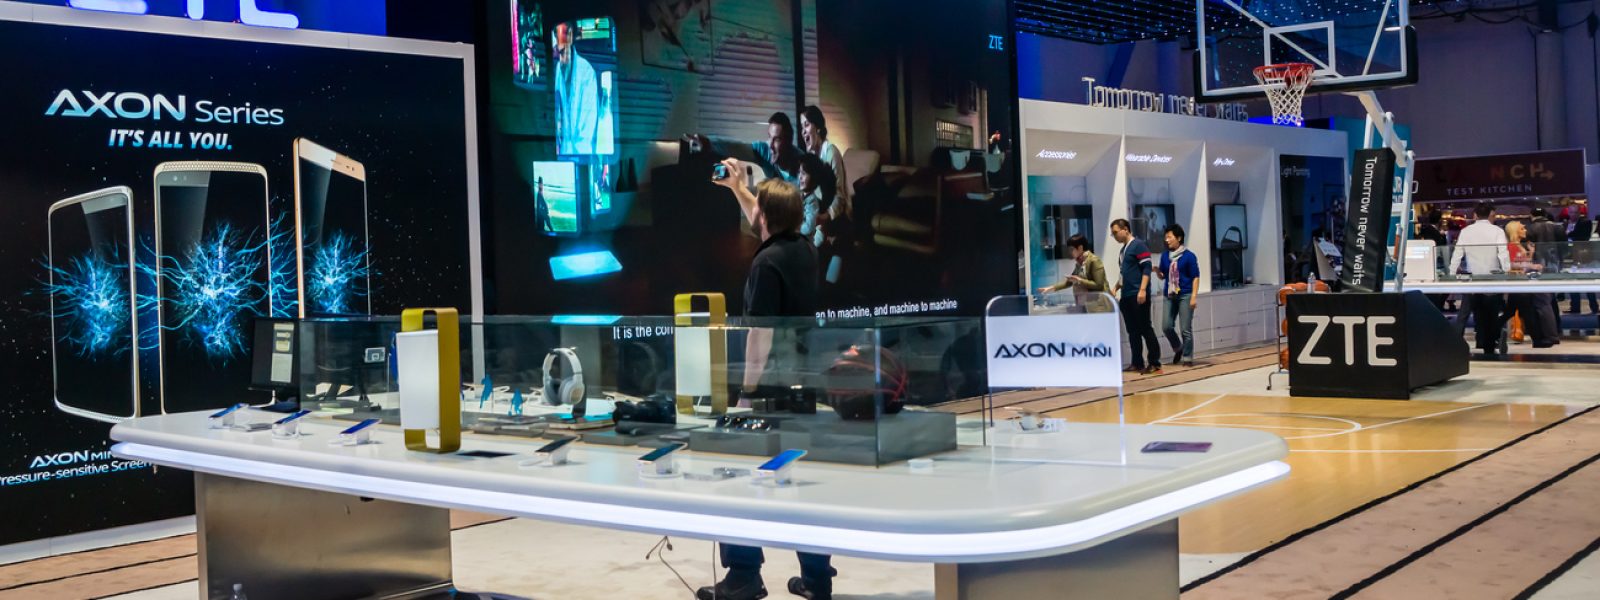 Las Vegas, NV, Jan. 9, 2016:  ZTE Corporation promotes its Axon series at a trade show exhibit at the 2016 Consumer Electronics Show (CES).